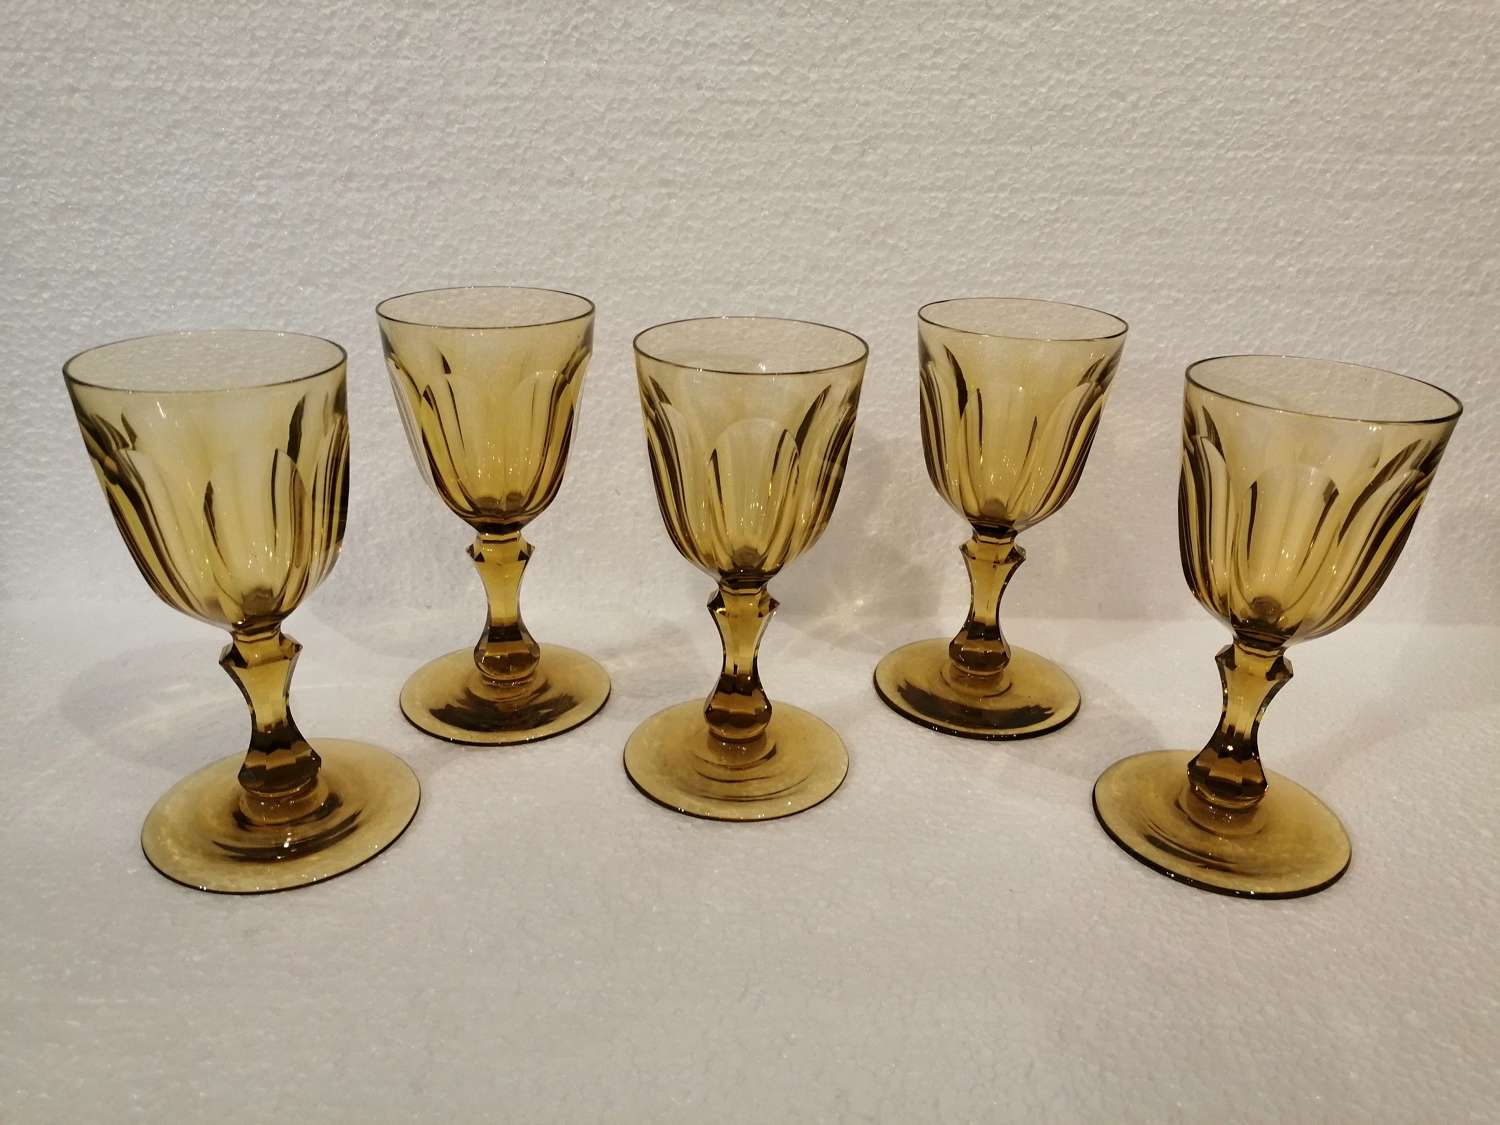 Five 19th century drinking glasses